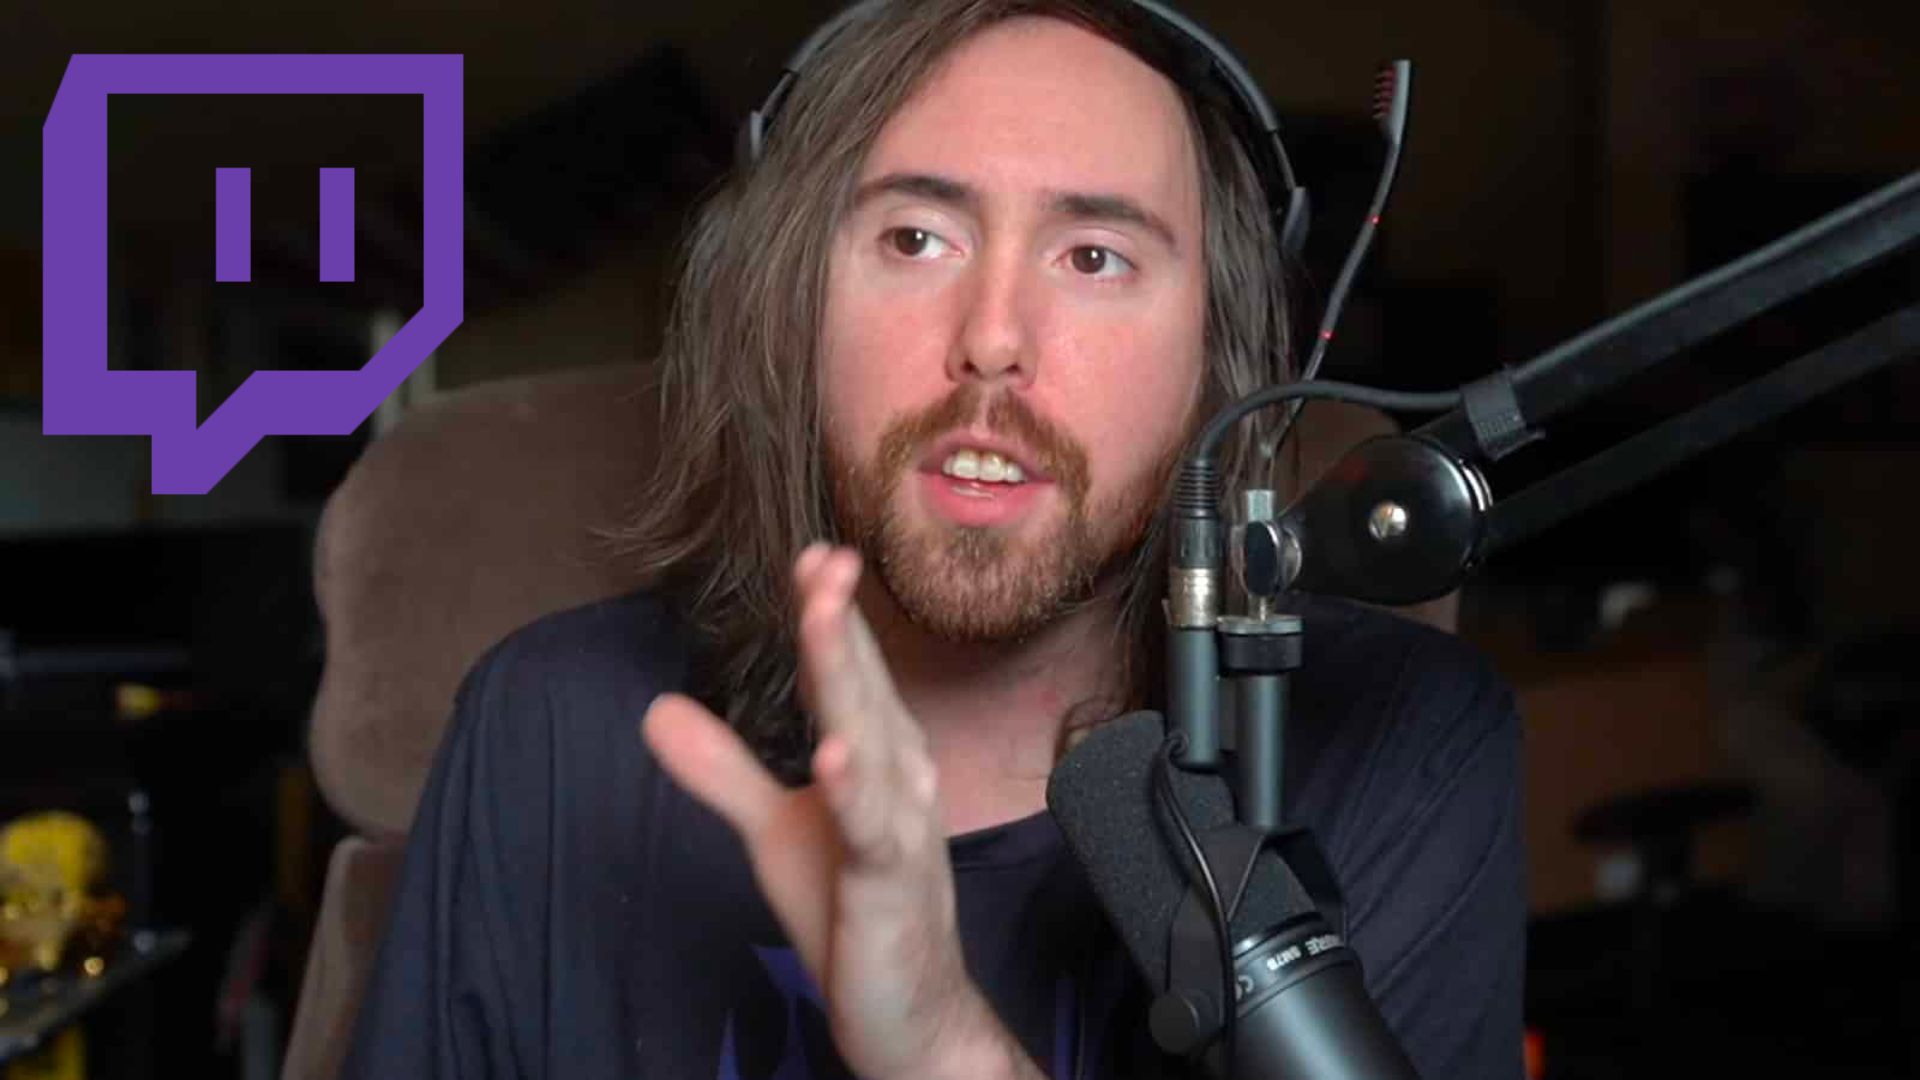 I f*cking made it!: xQc and Asmongold react to streamers being featured in  the Depp v. Heard Netflix docuseries